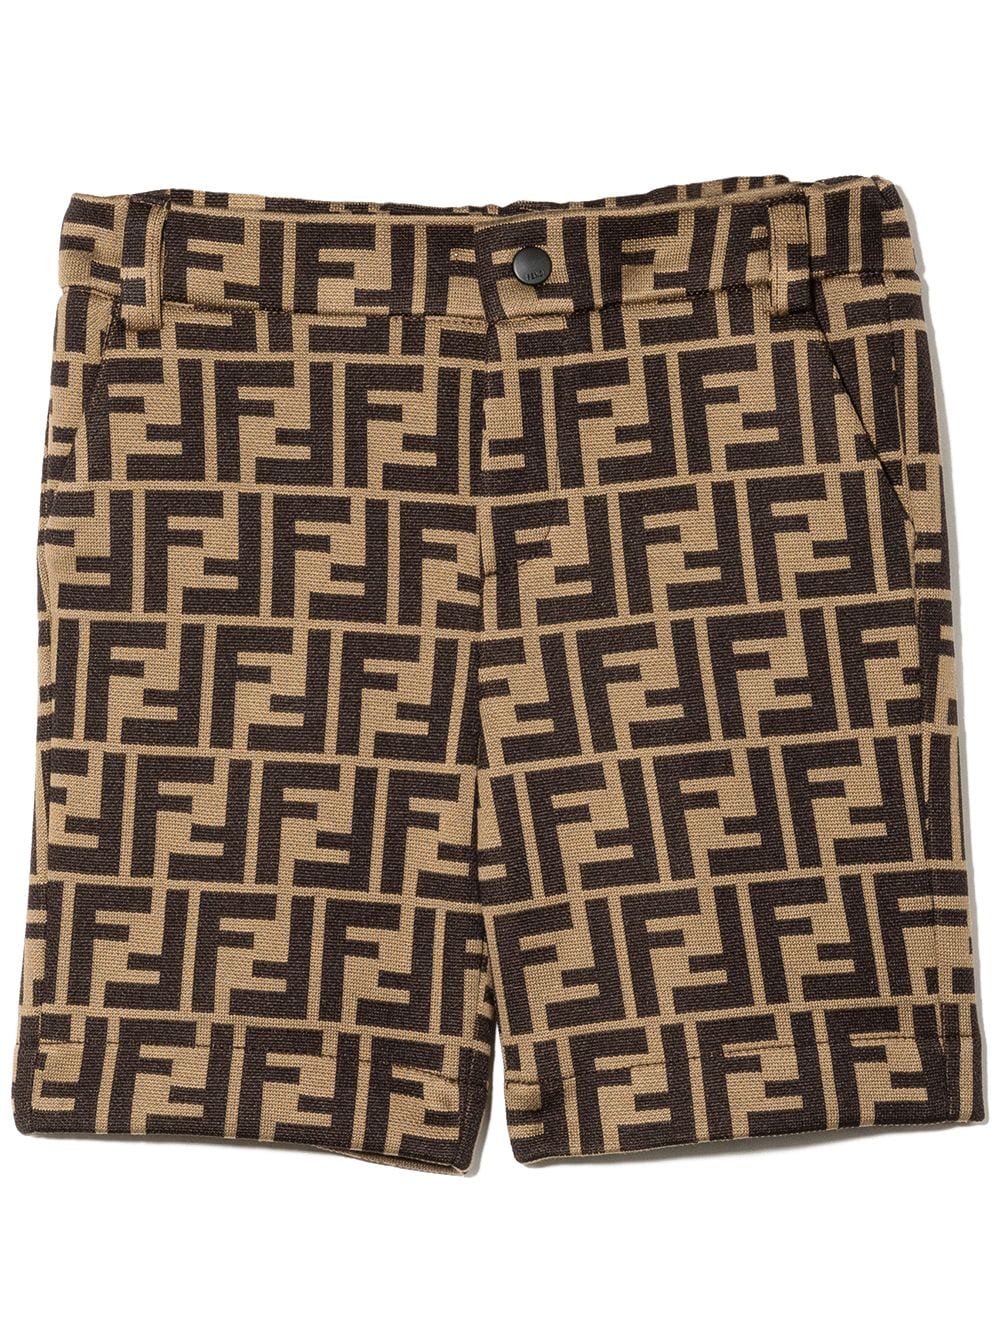 Brown Bermuda shorts for newborns with all-over logo